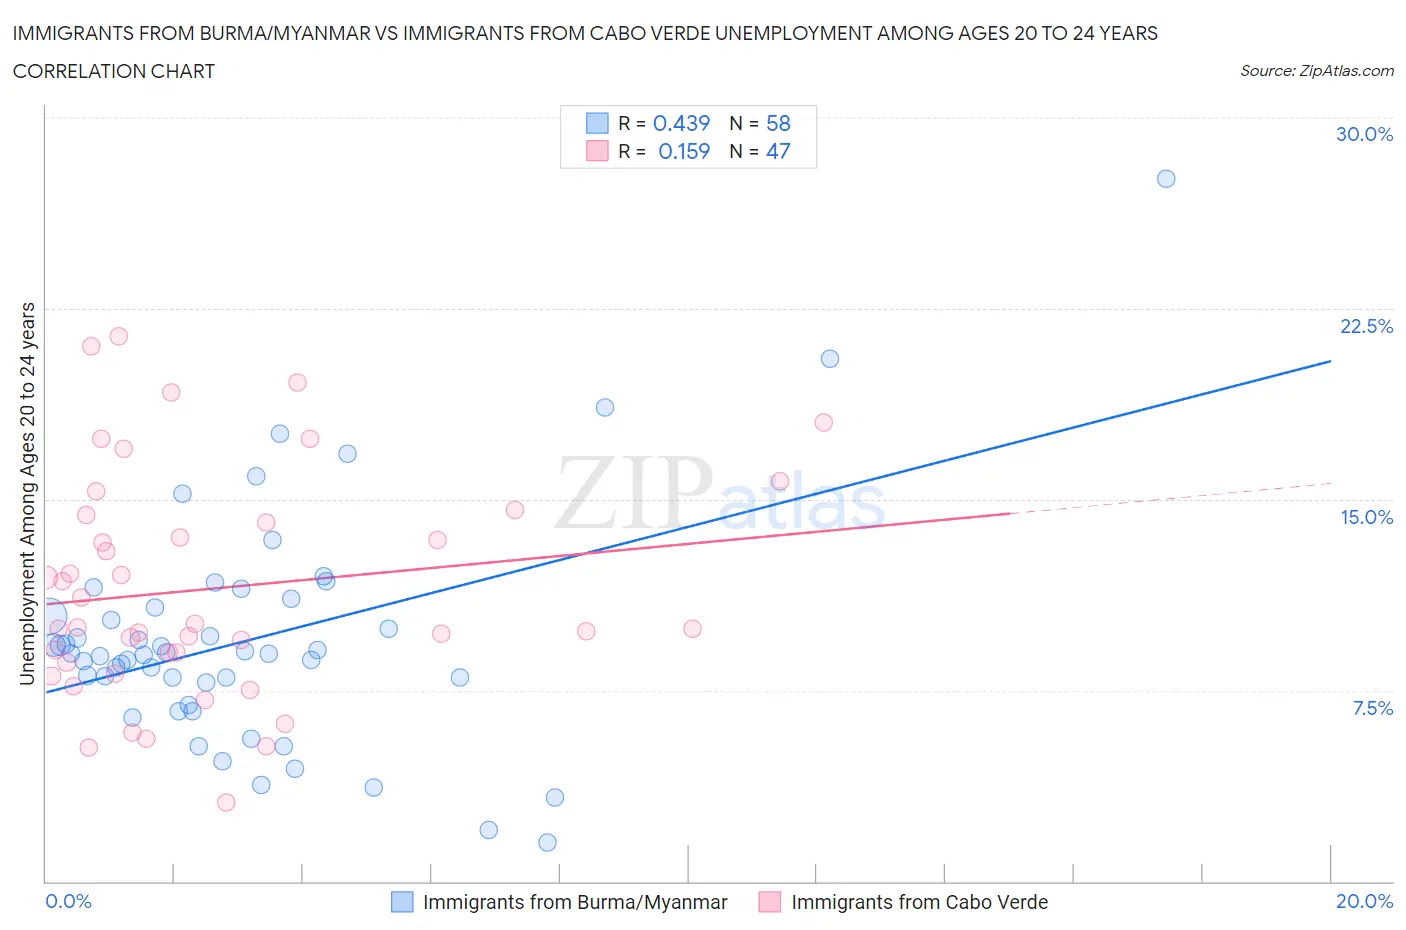 Immigrants from Burma/Myanmar vs Immigrants from Cabo Verde Unemployment Among Ages 20 to 24 years